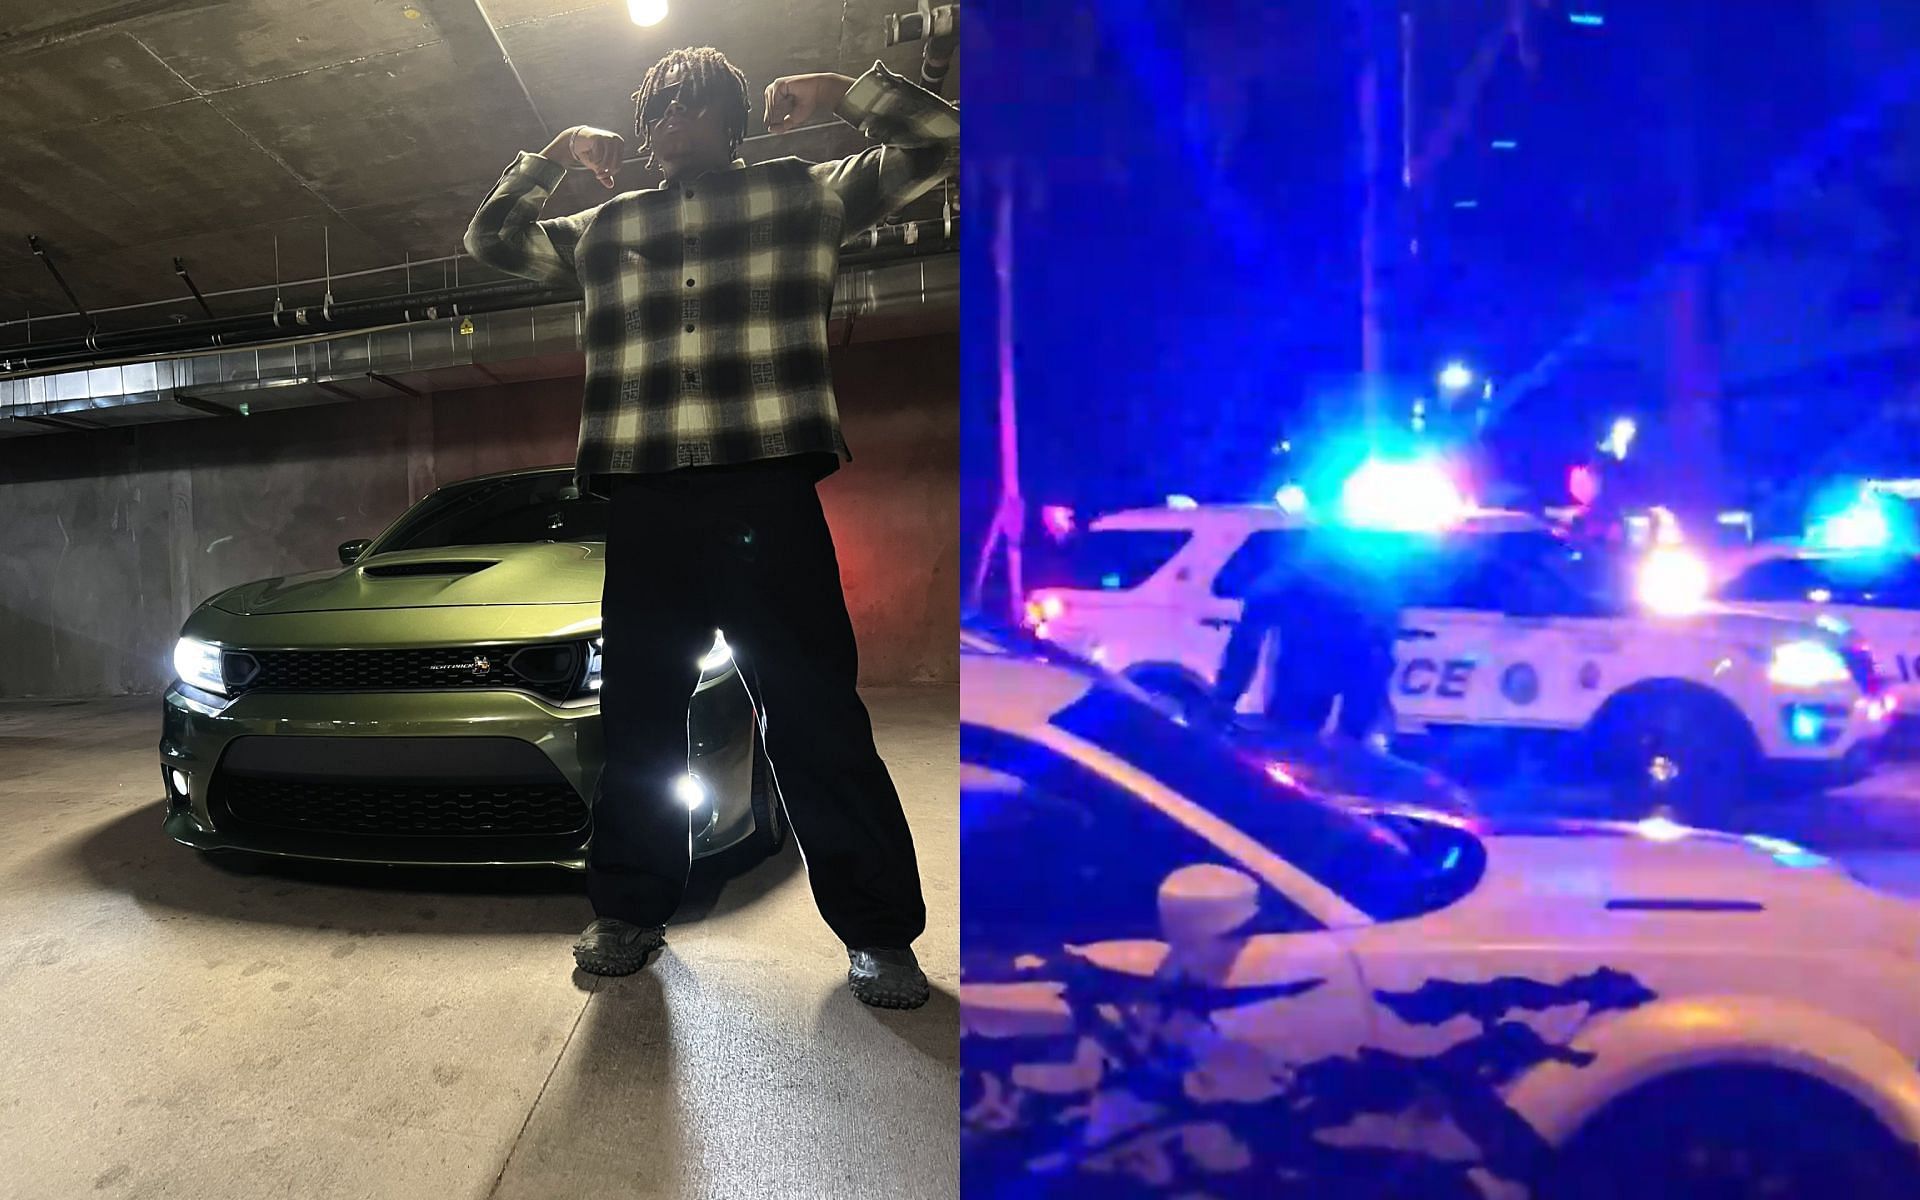 Kick streamer Cuffem gets pulled over for allegedly street racing, later gets hit by a vehicle (Image via @DramaAlert and @cuffem/X)